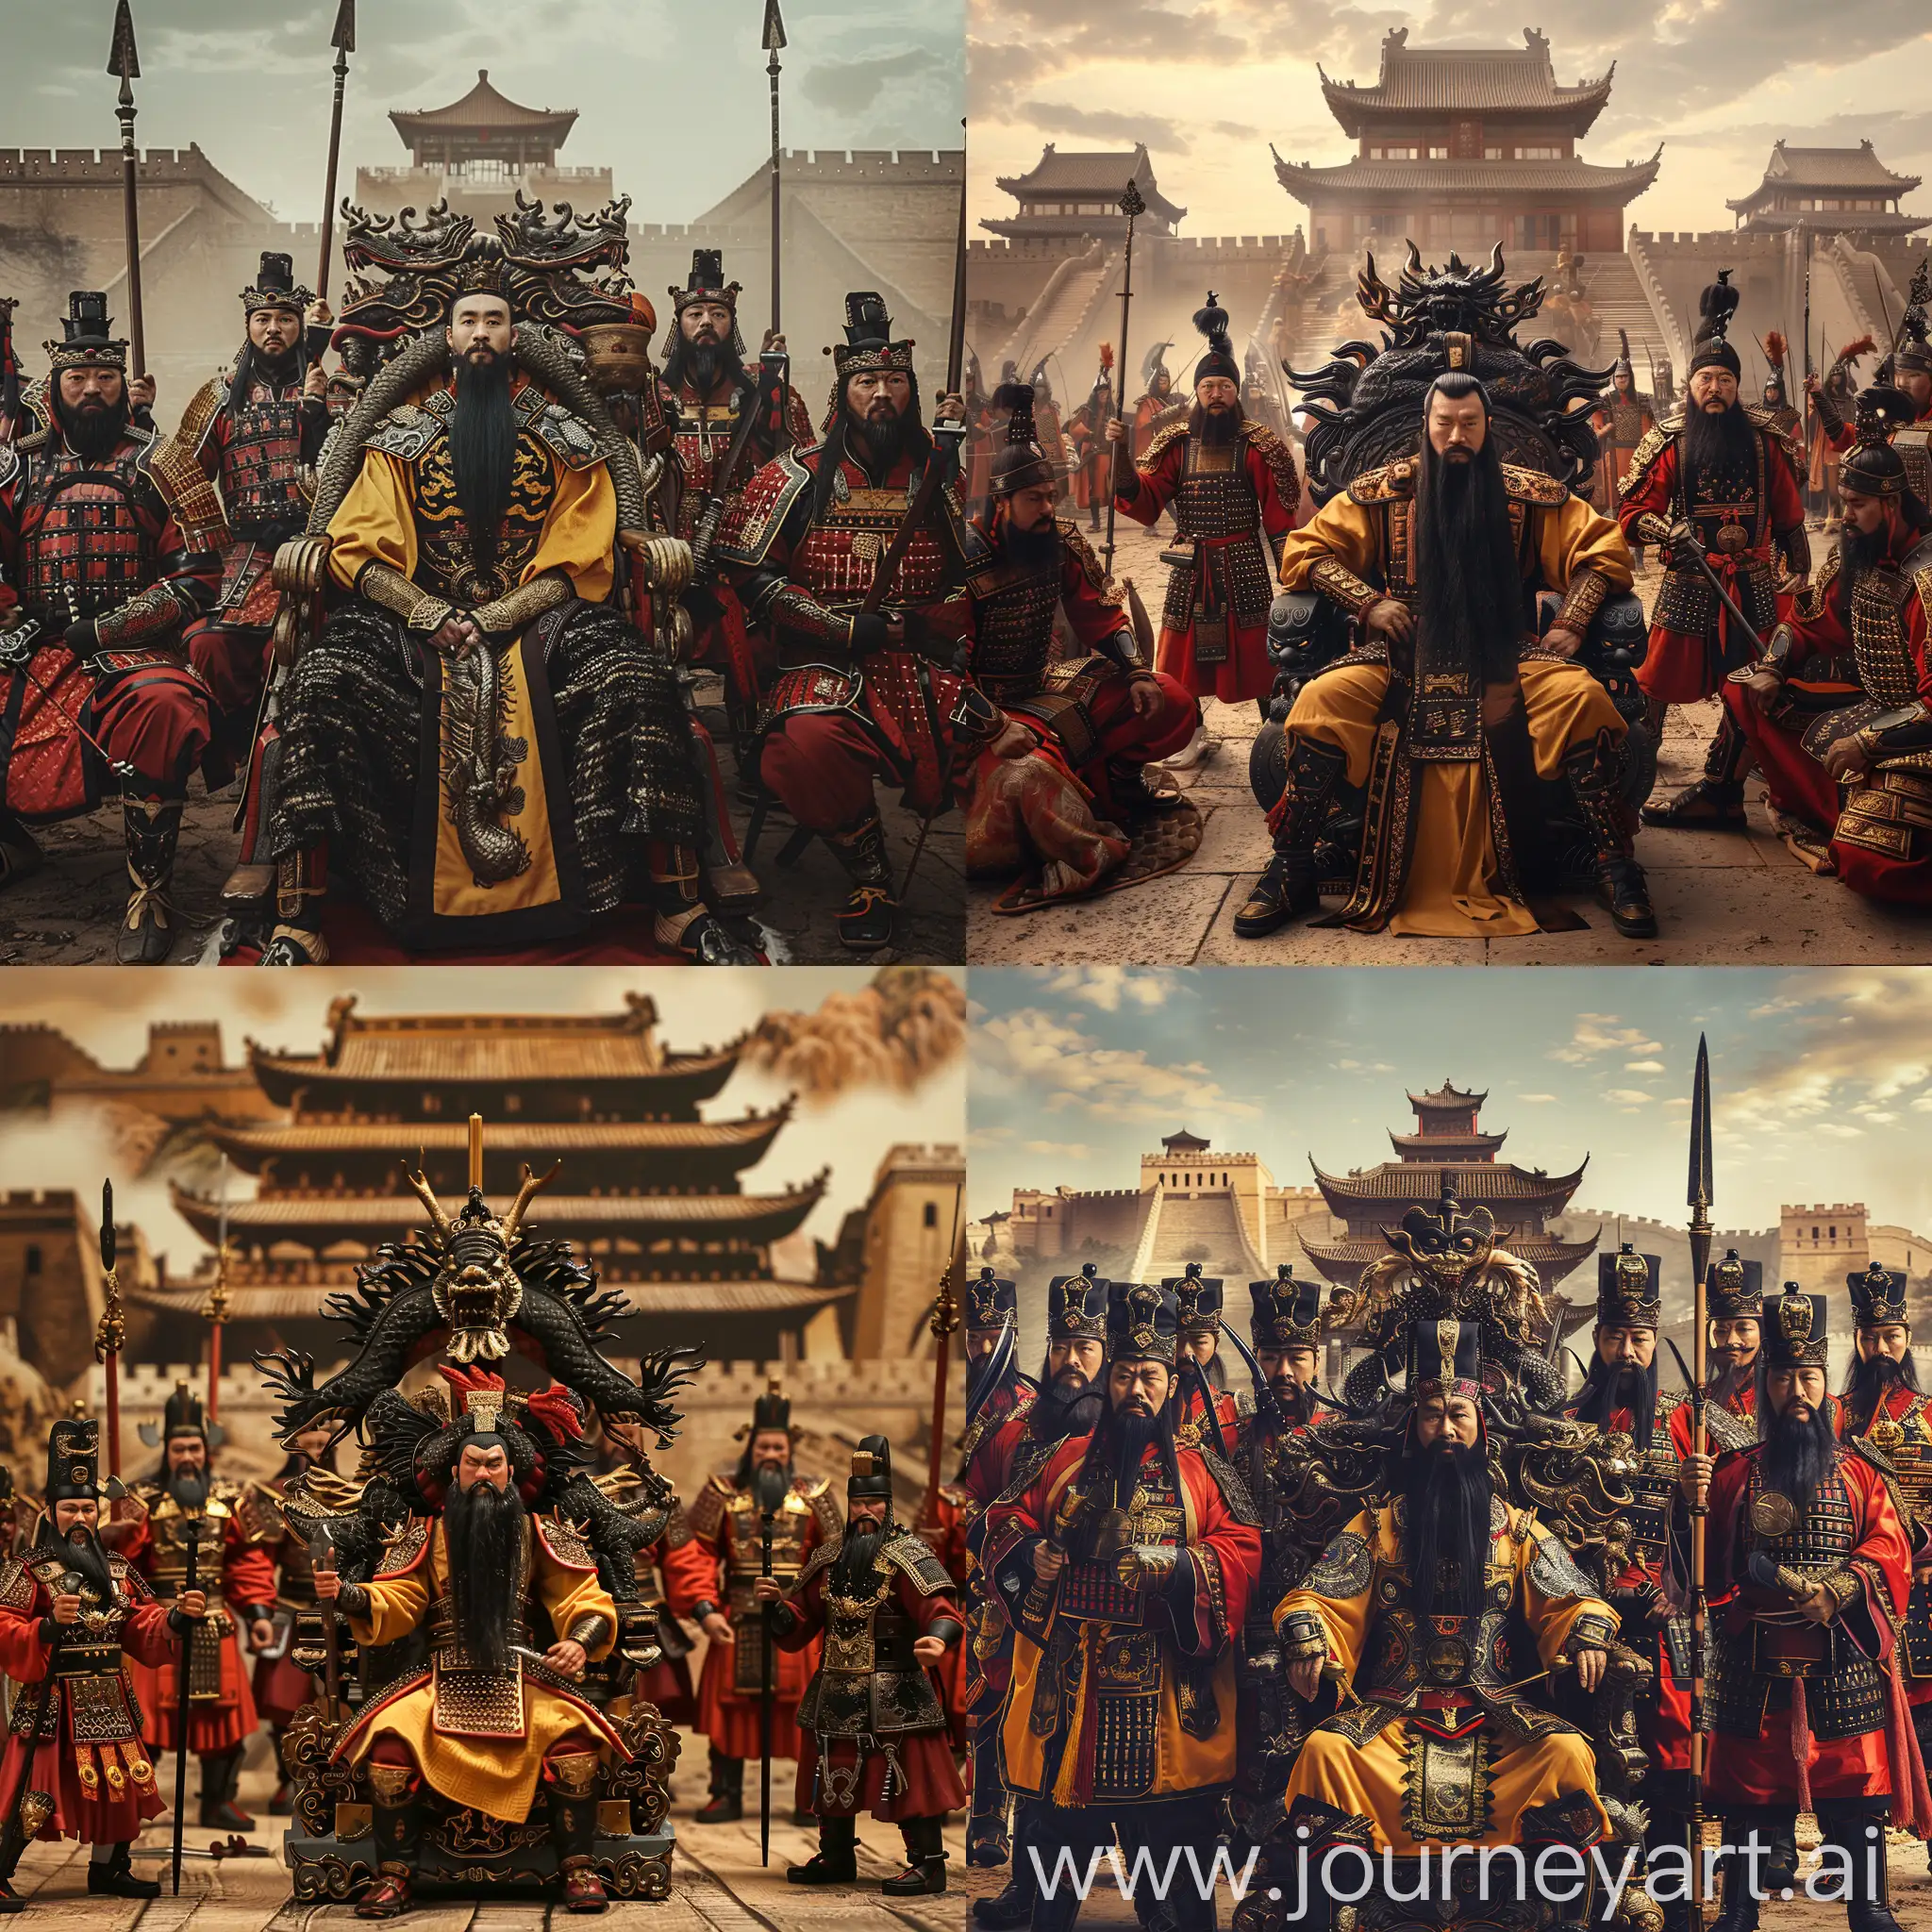 Qin-Shi-Huang-on-Dragon-Imperial-Throne-with-Qin-Dynasty-Warriors-in-Ancient-Chinese-Armor